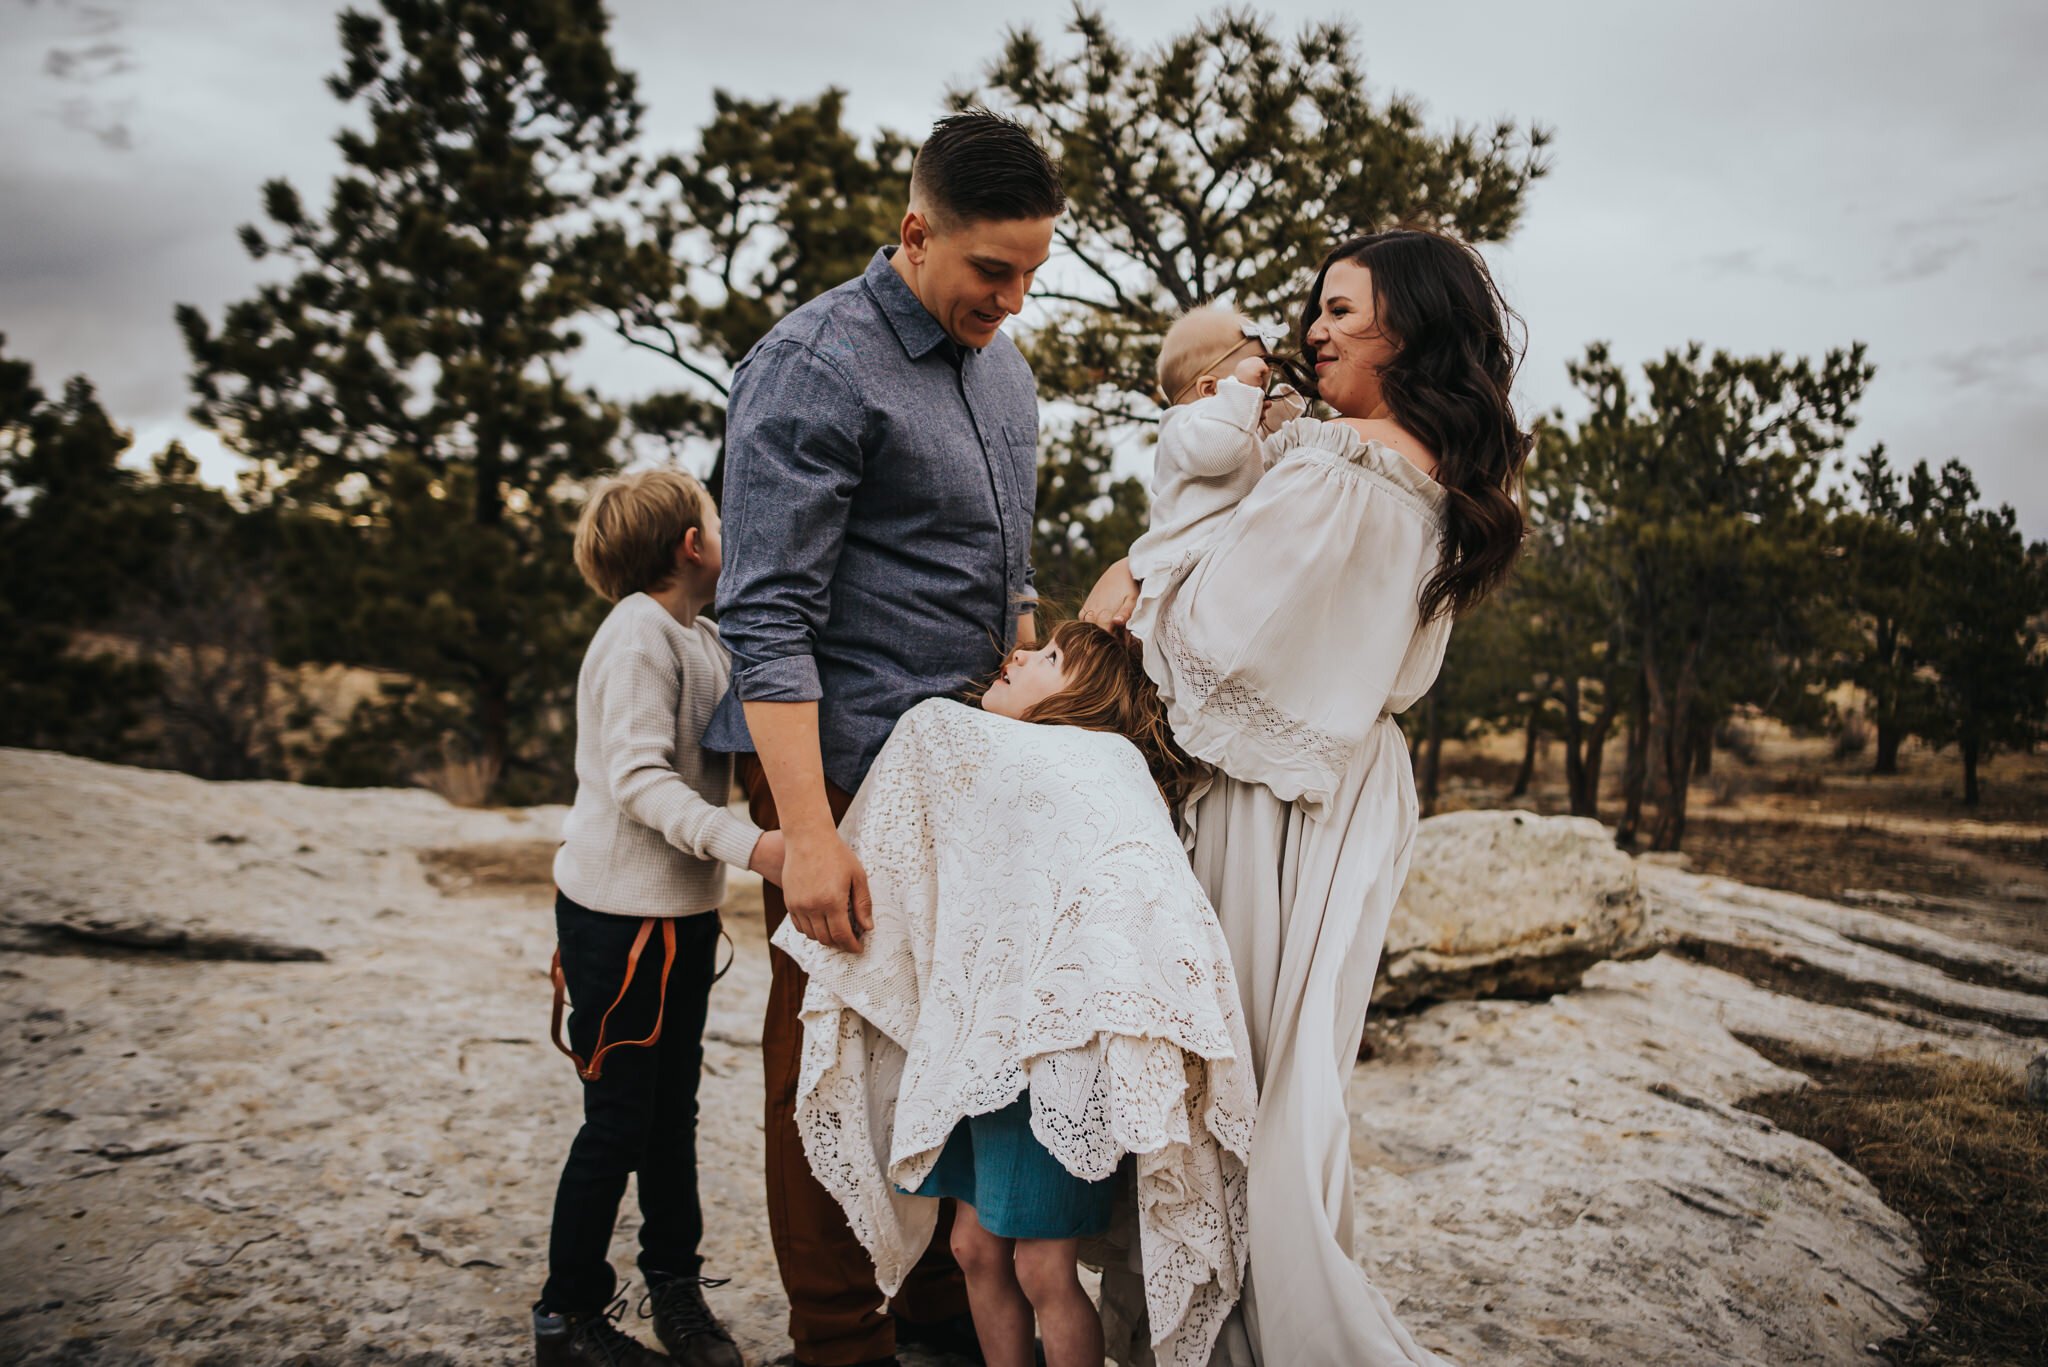 Miller+Family+Session+Mentorship+Colorado+Springs+Colorado+Sunset+Ute+Valley+Park+Mountains+Fields+Mom+Dad+Son+Daughter+Baby+Wild+Prairie+Photography-24-2020.jpeg